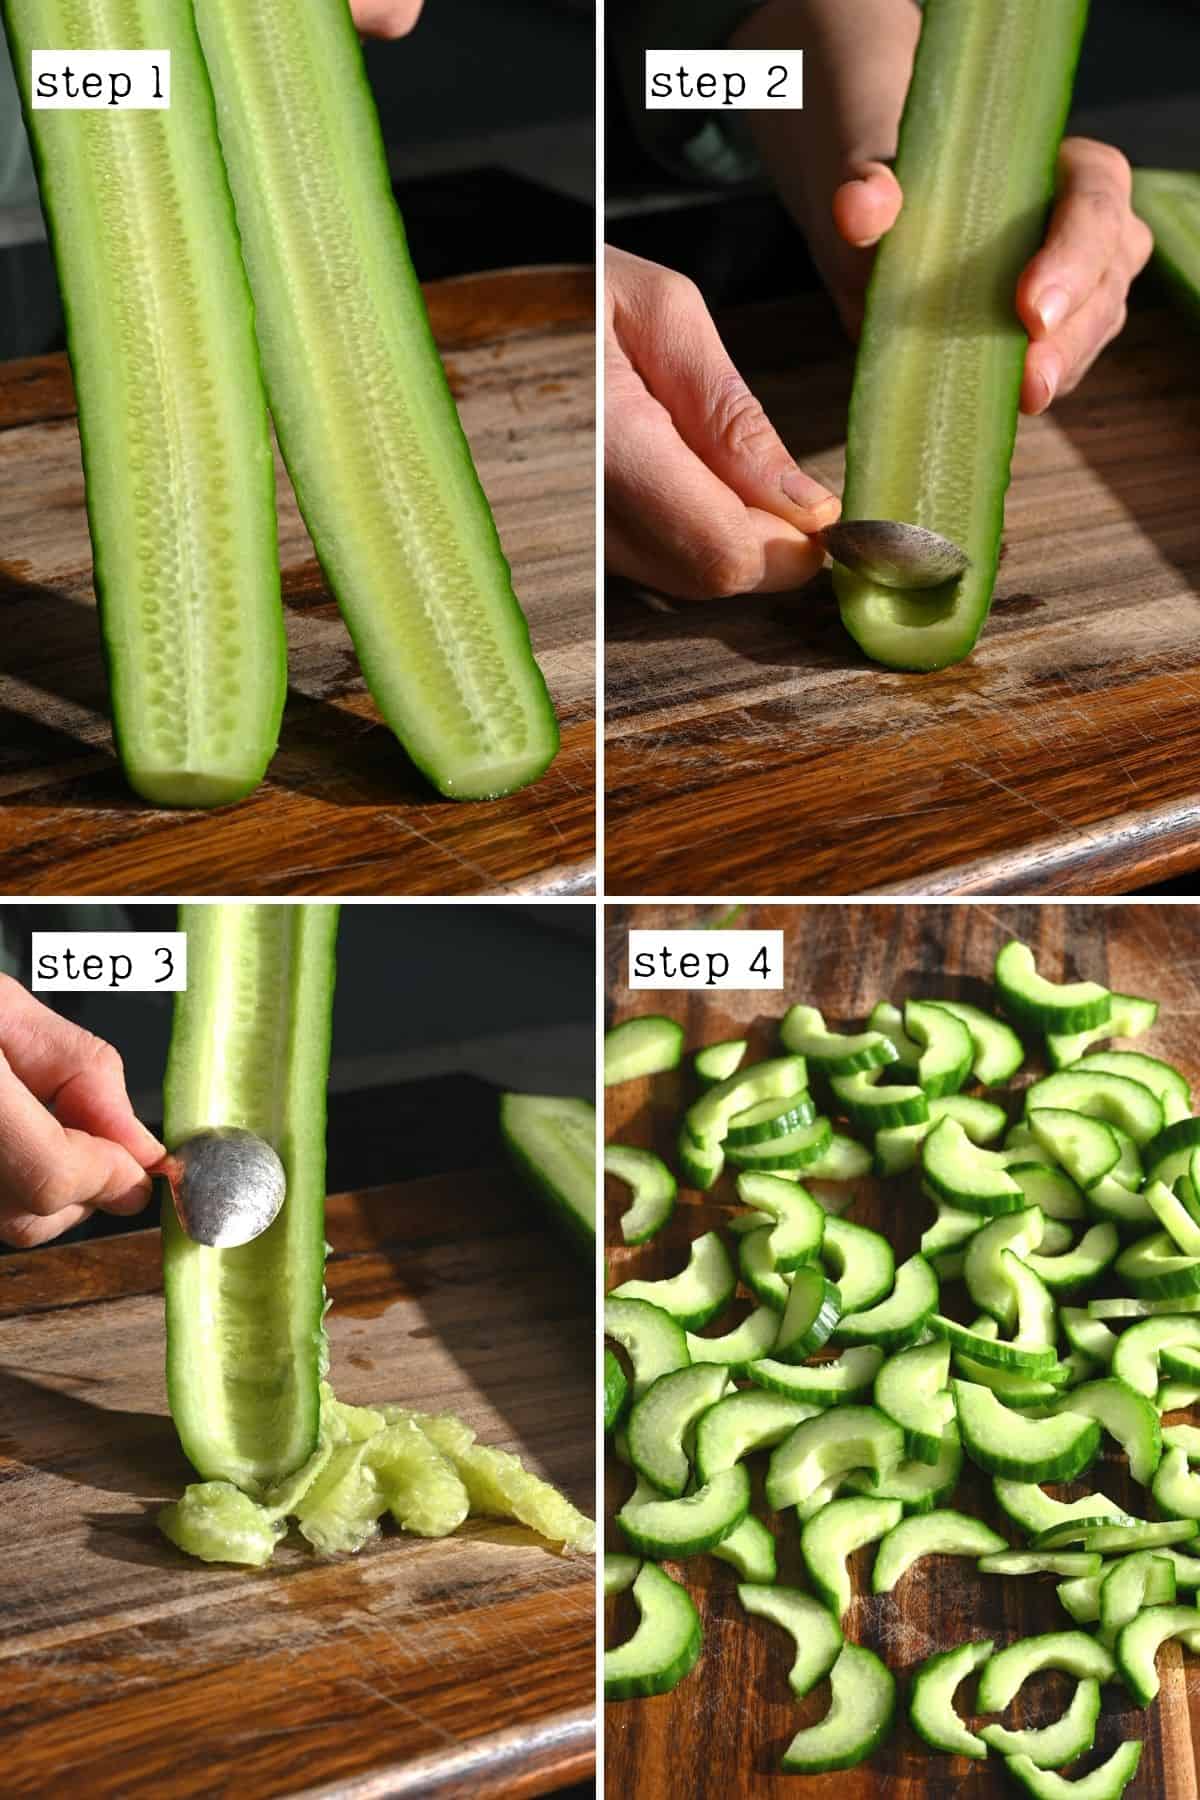 Steps for coring and chopping a cucumber